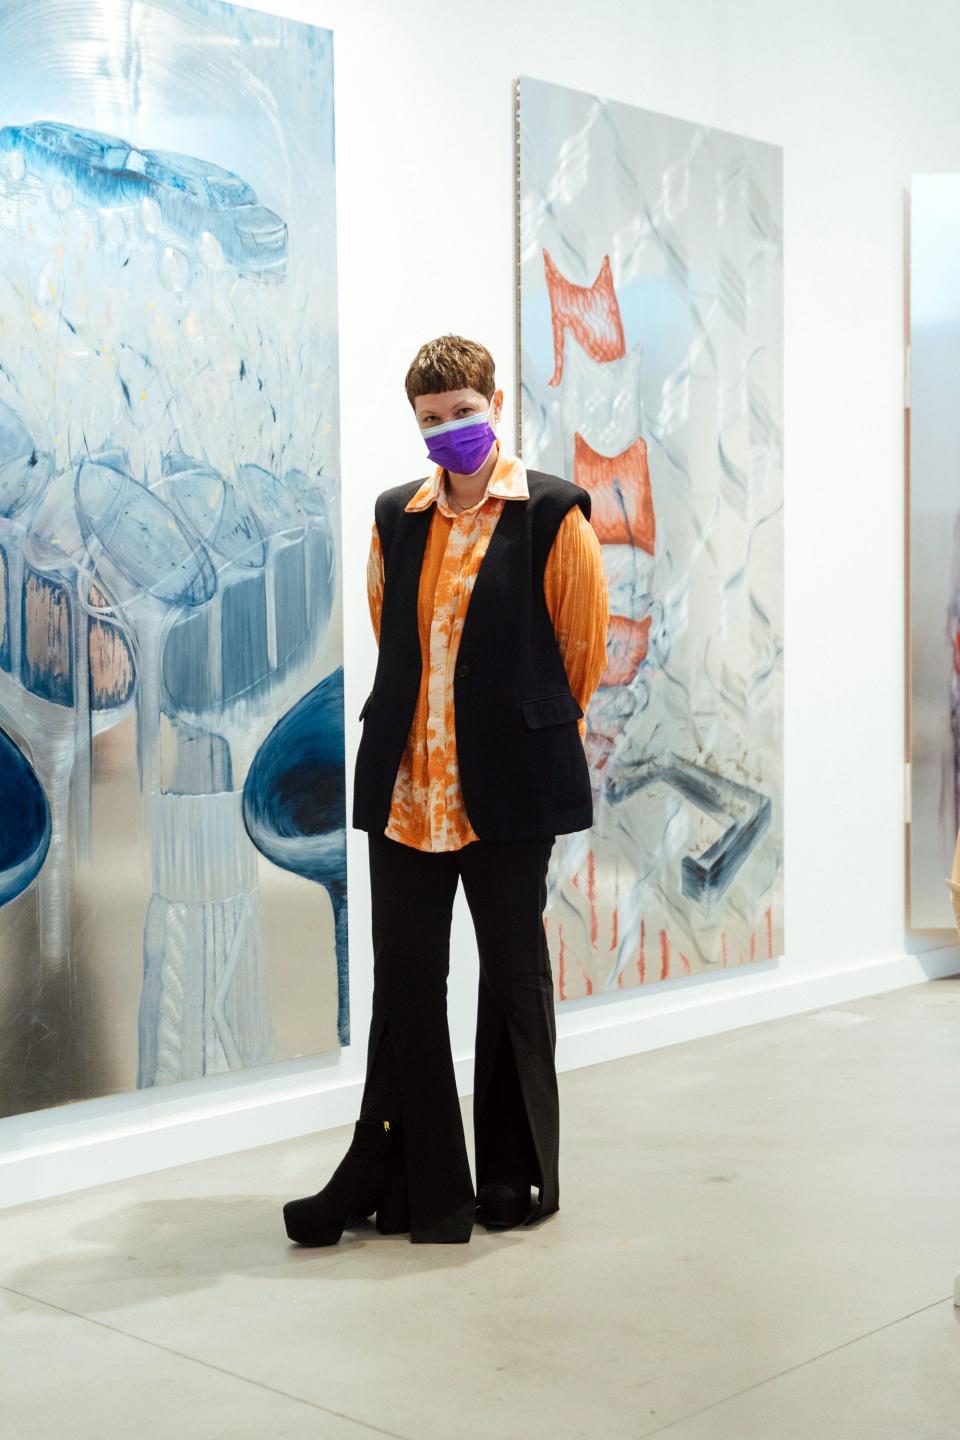 Easy Suiting Was King at Frieze New York